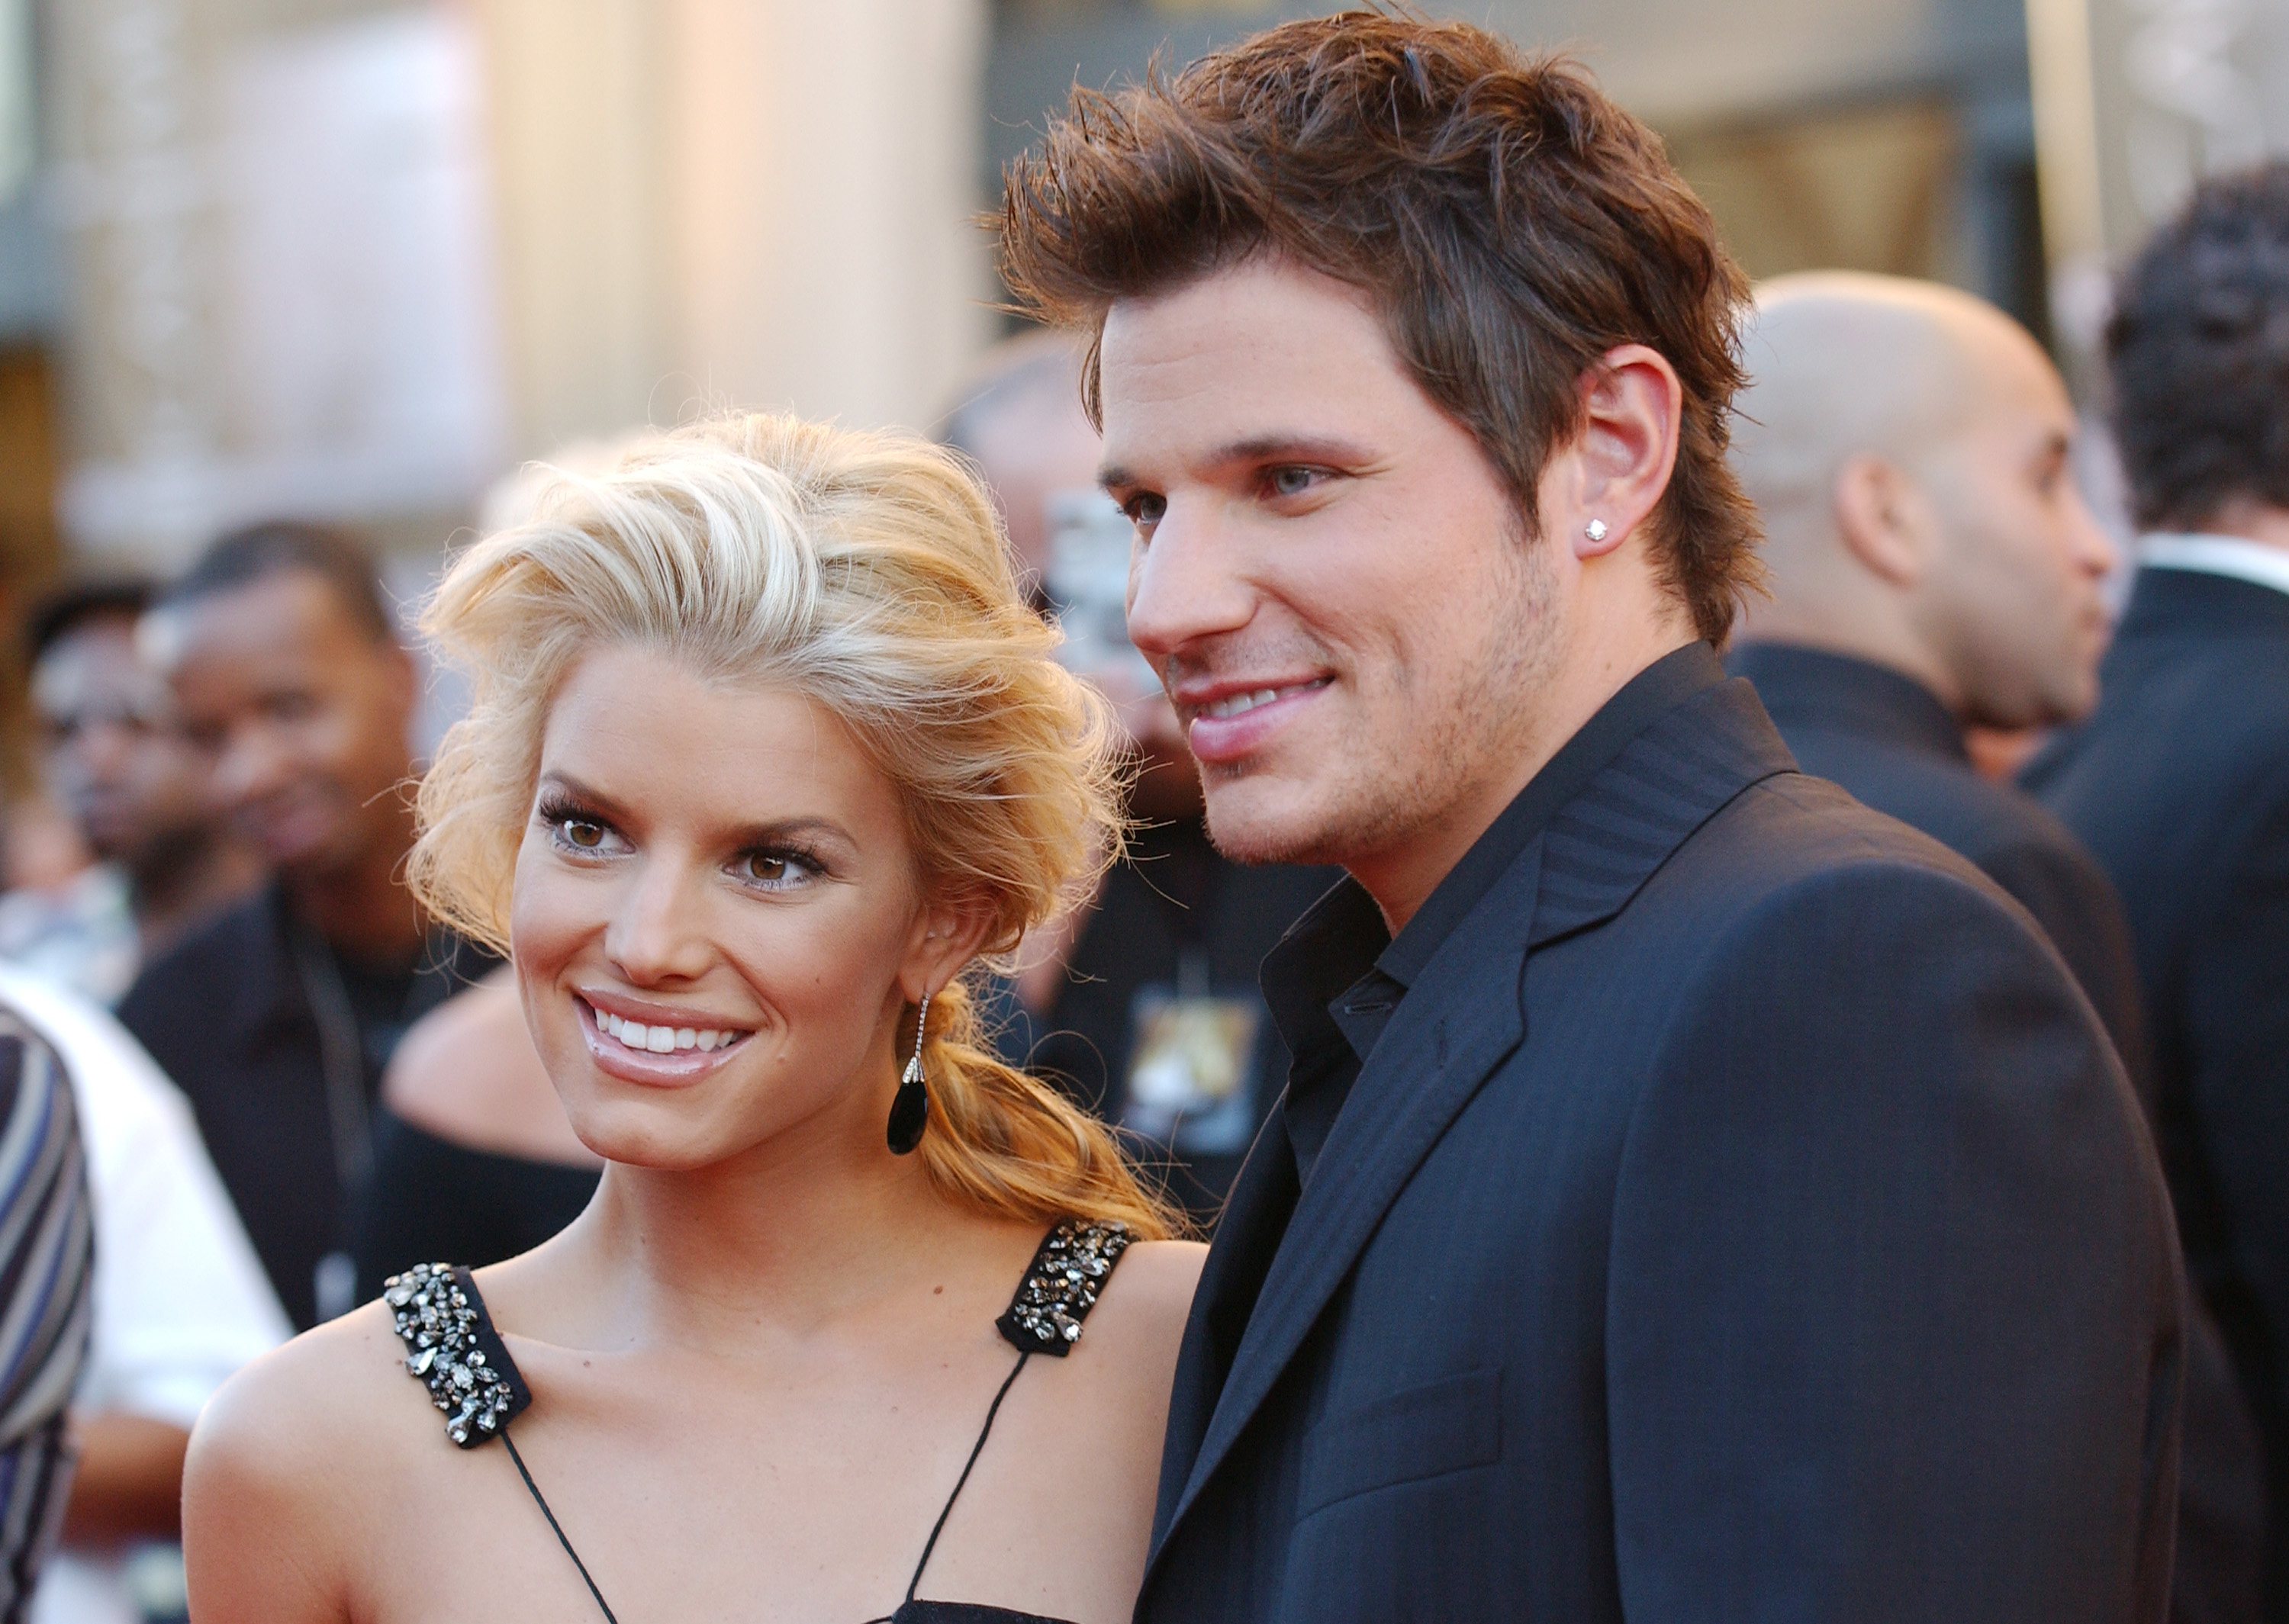 What Jessica Simpson’s ex-husband Nick Lachey has said about her memoir ...